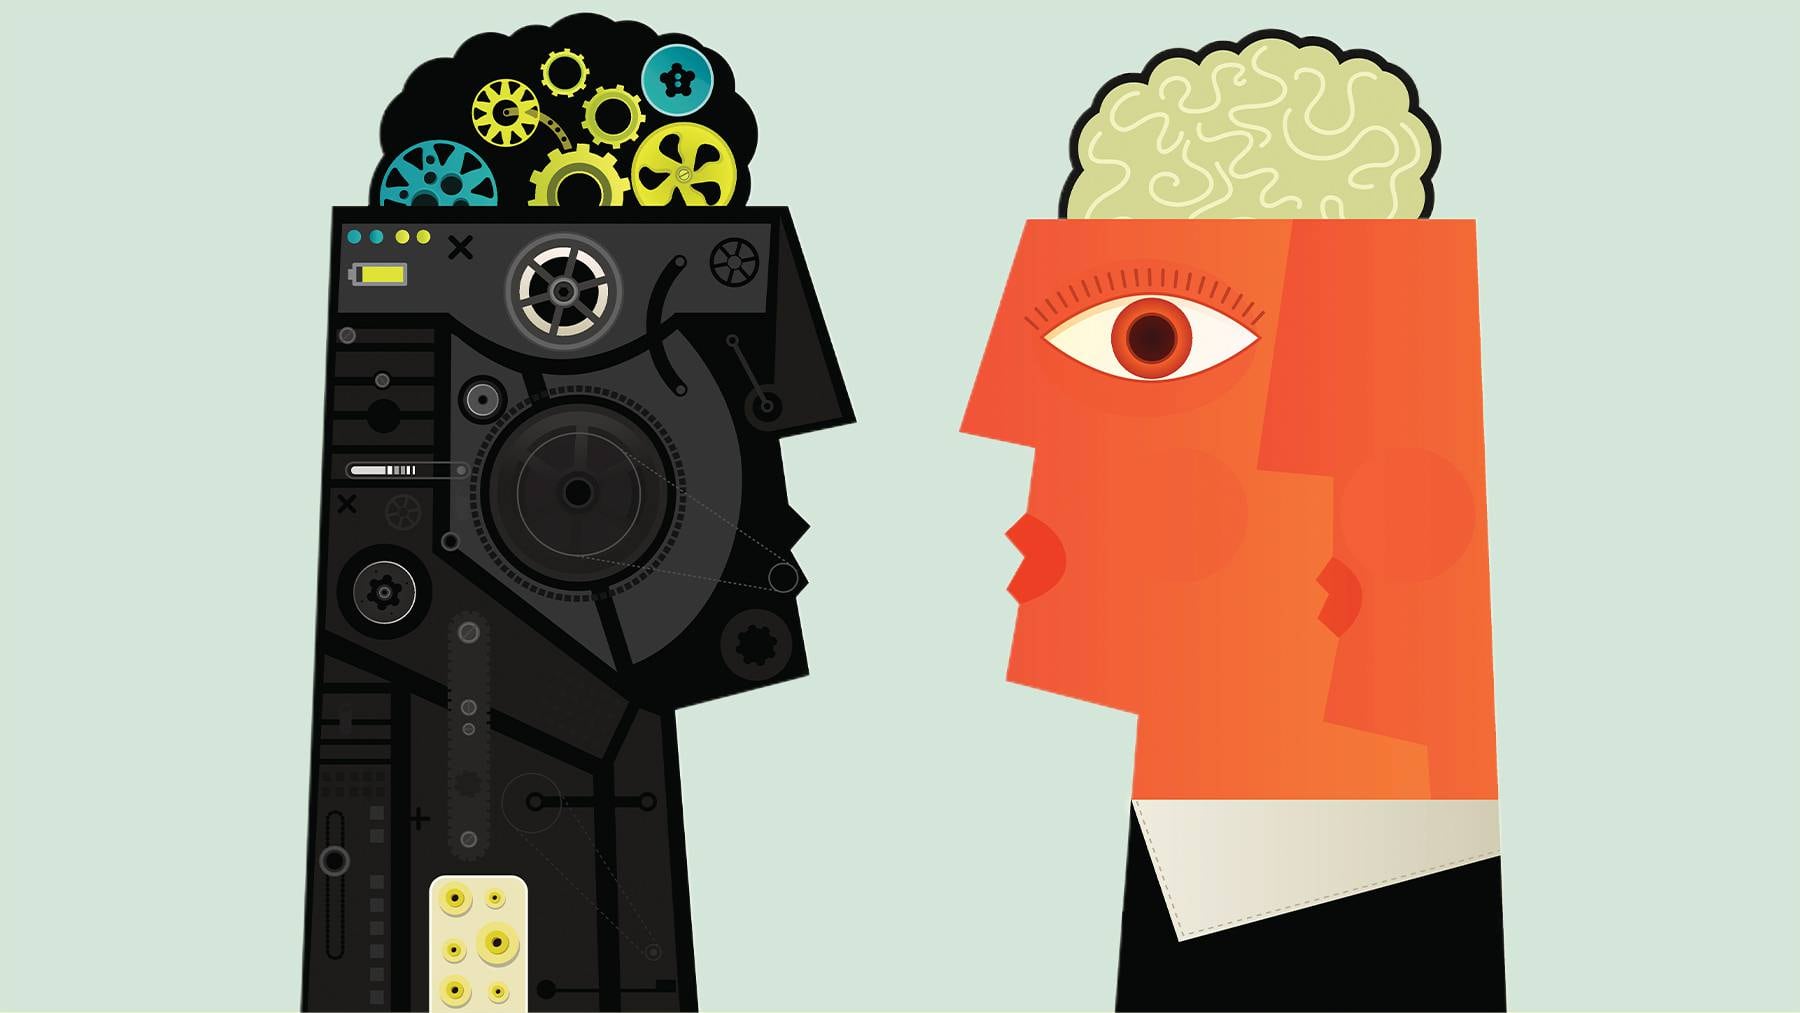 Two people facing each other. The one on the left with a machine brain and cogs visible and the one on the right with a human face.